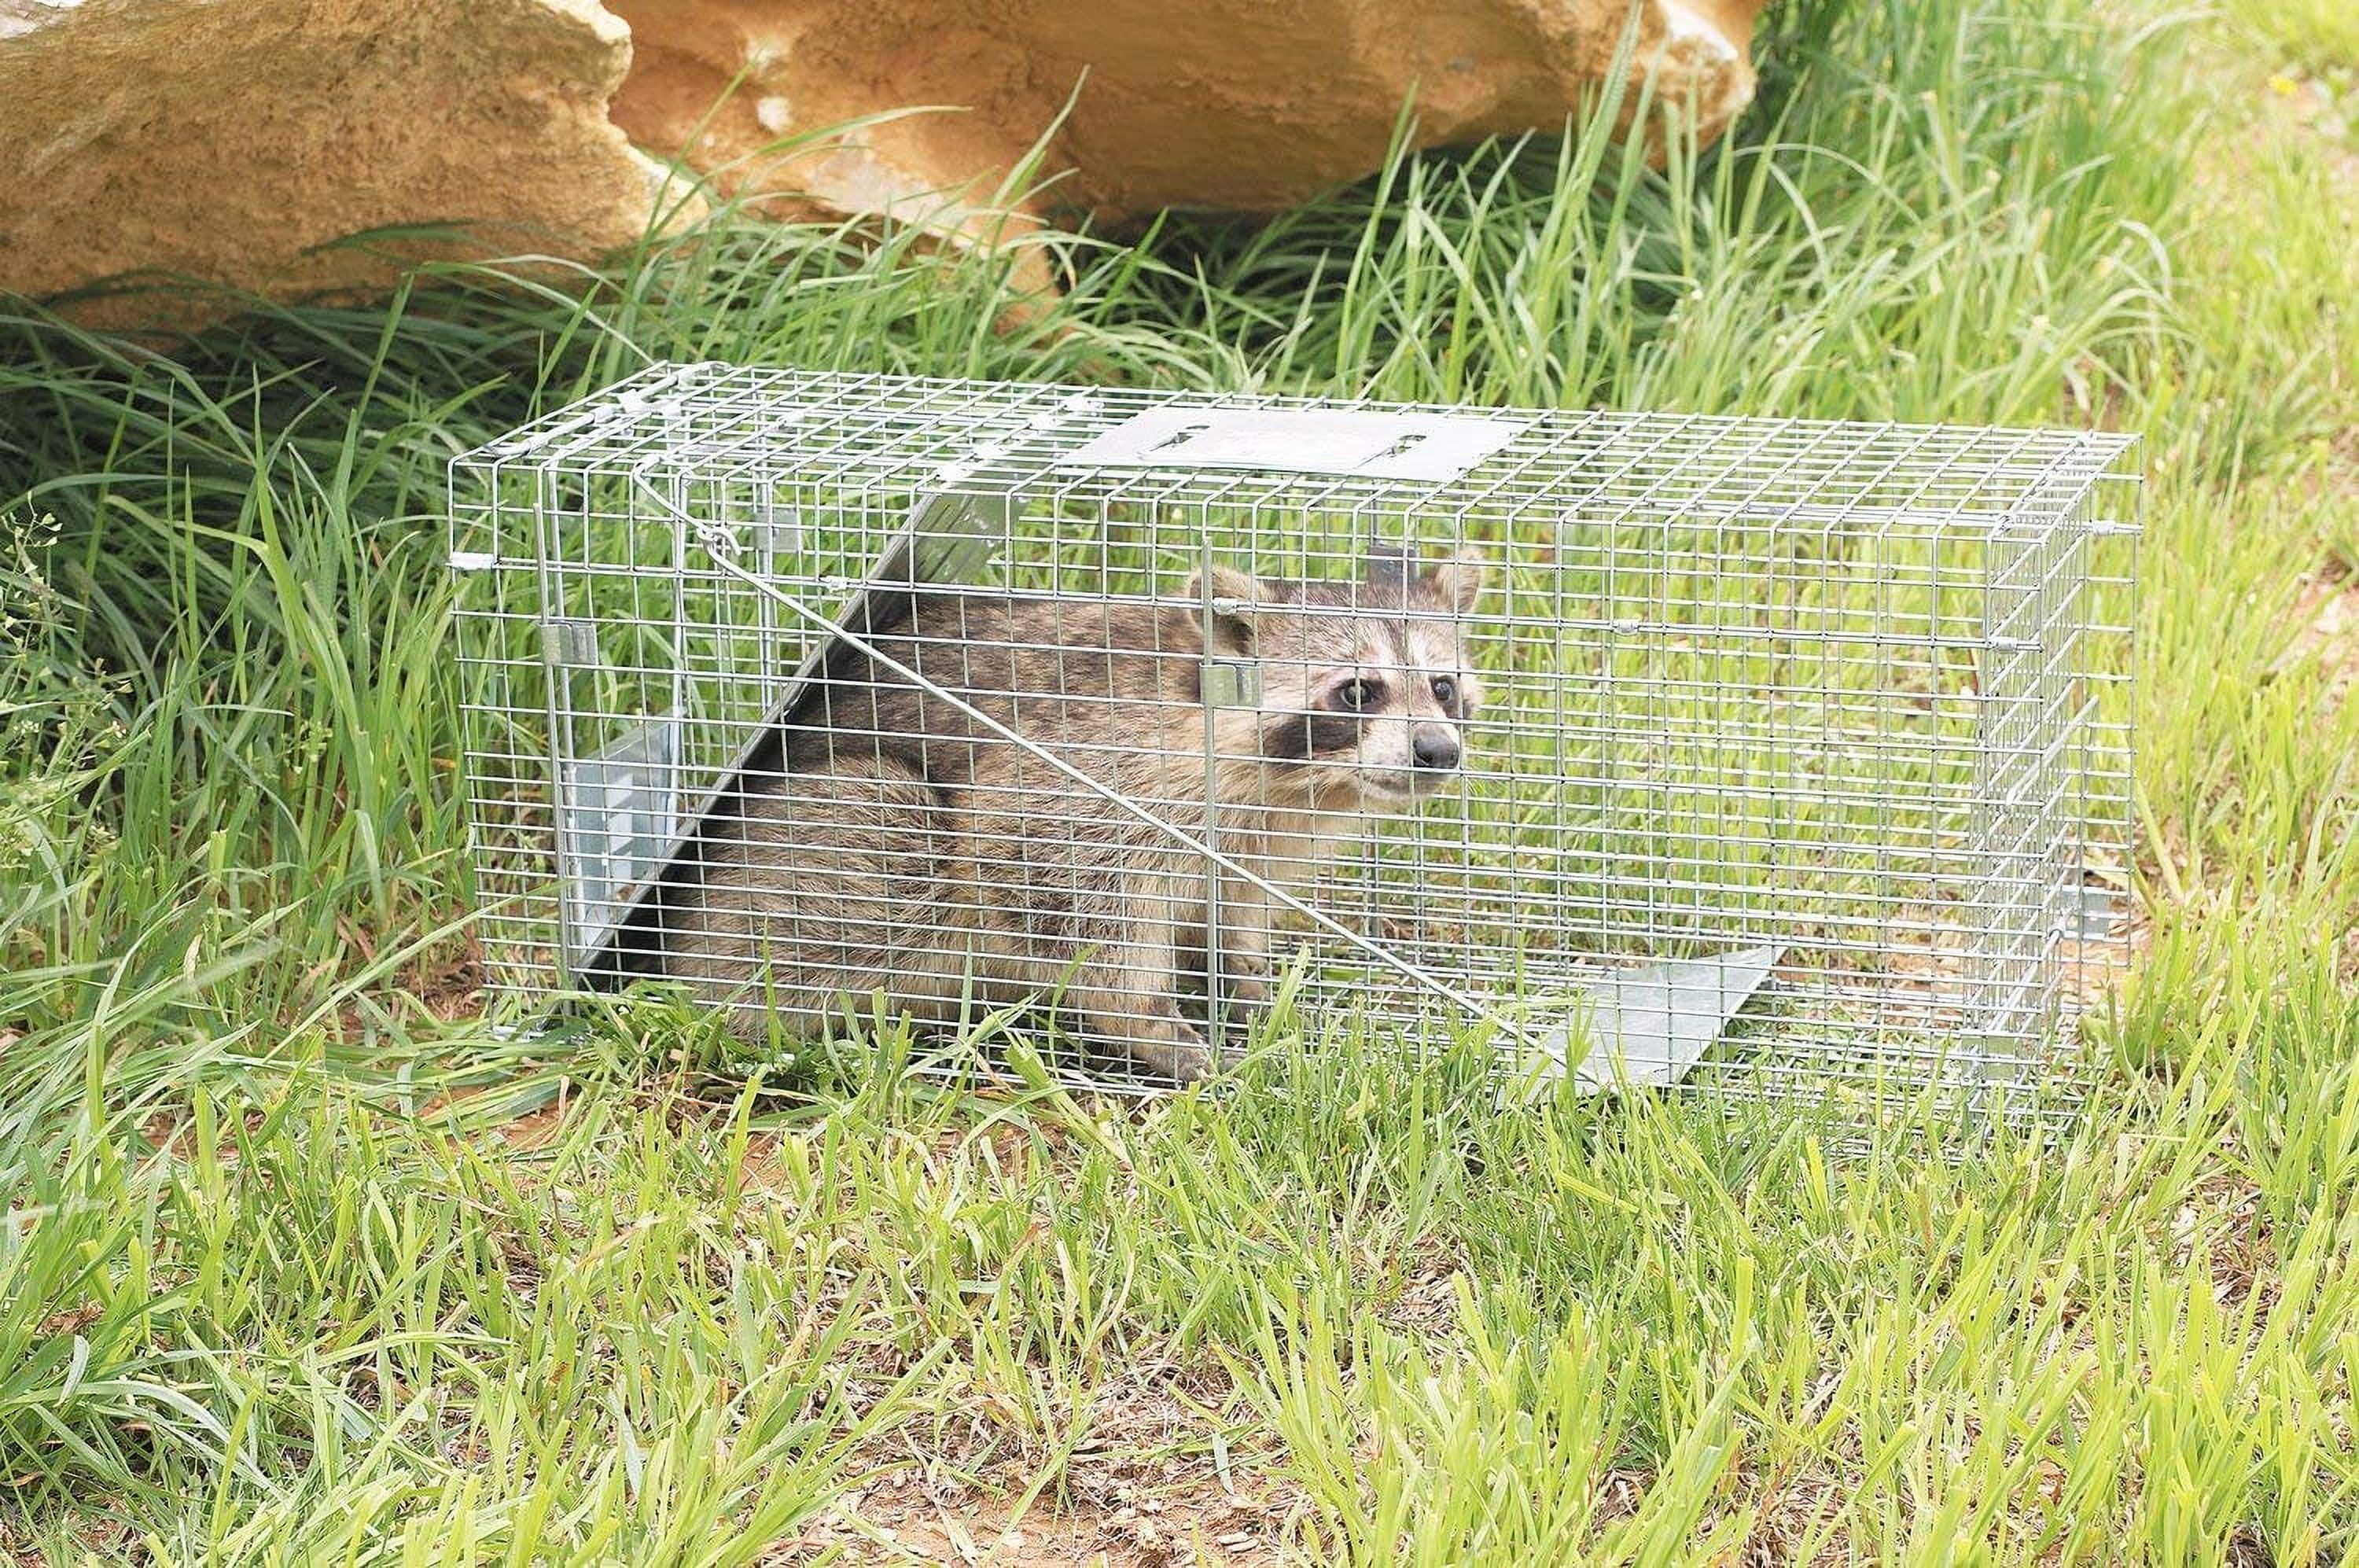  Havahart 1079SR Large 1-Door Humane Catch and Release Live  Animal Trap for Raccoons, Cats, Bobcats, Beavers, Small Dogs, Groundhogs,  Opossums, Foxes, Armadillos, and Similar-Sized Animals : Home Pest Control  Traps 